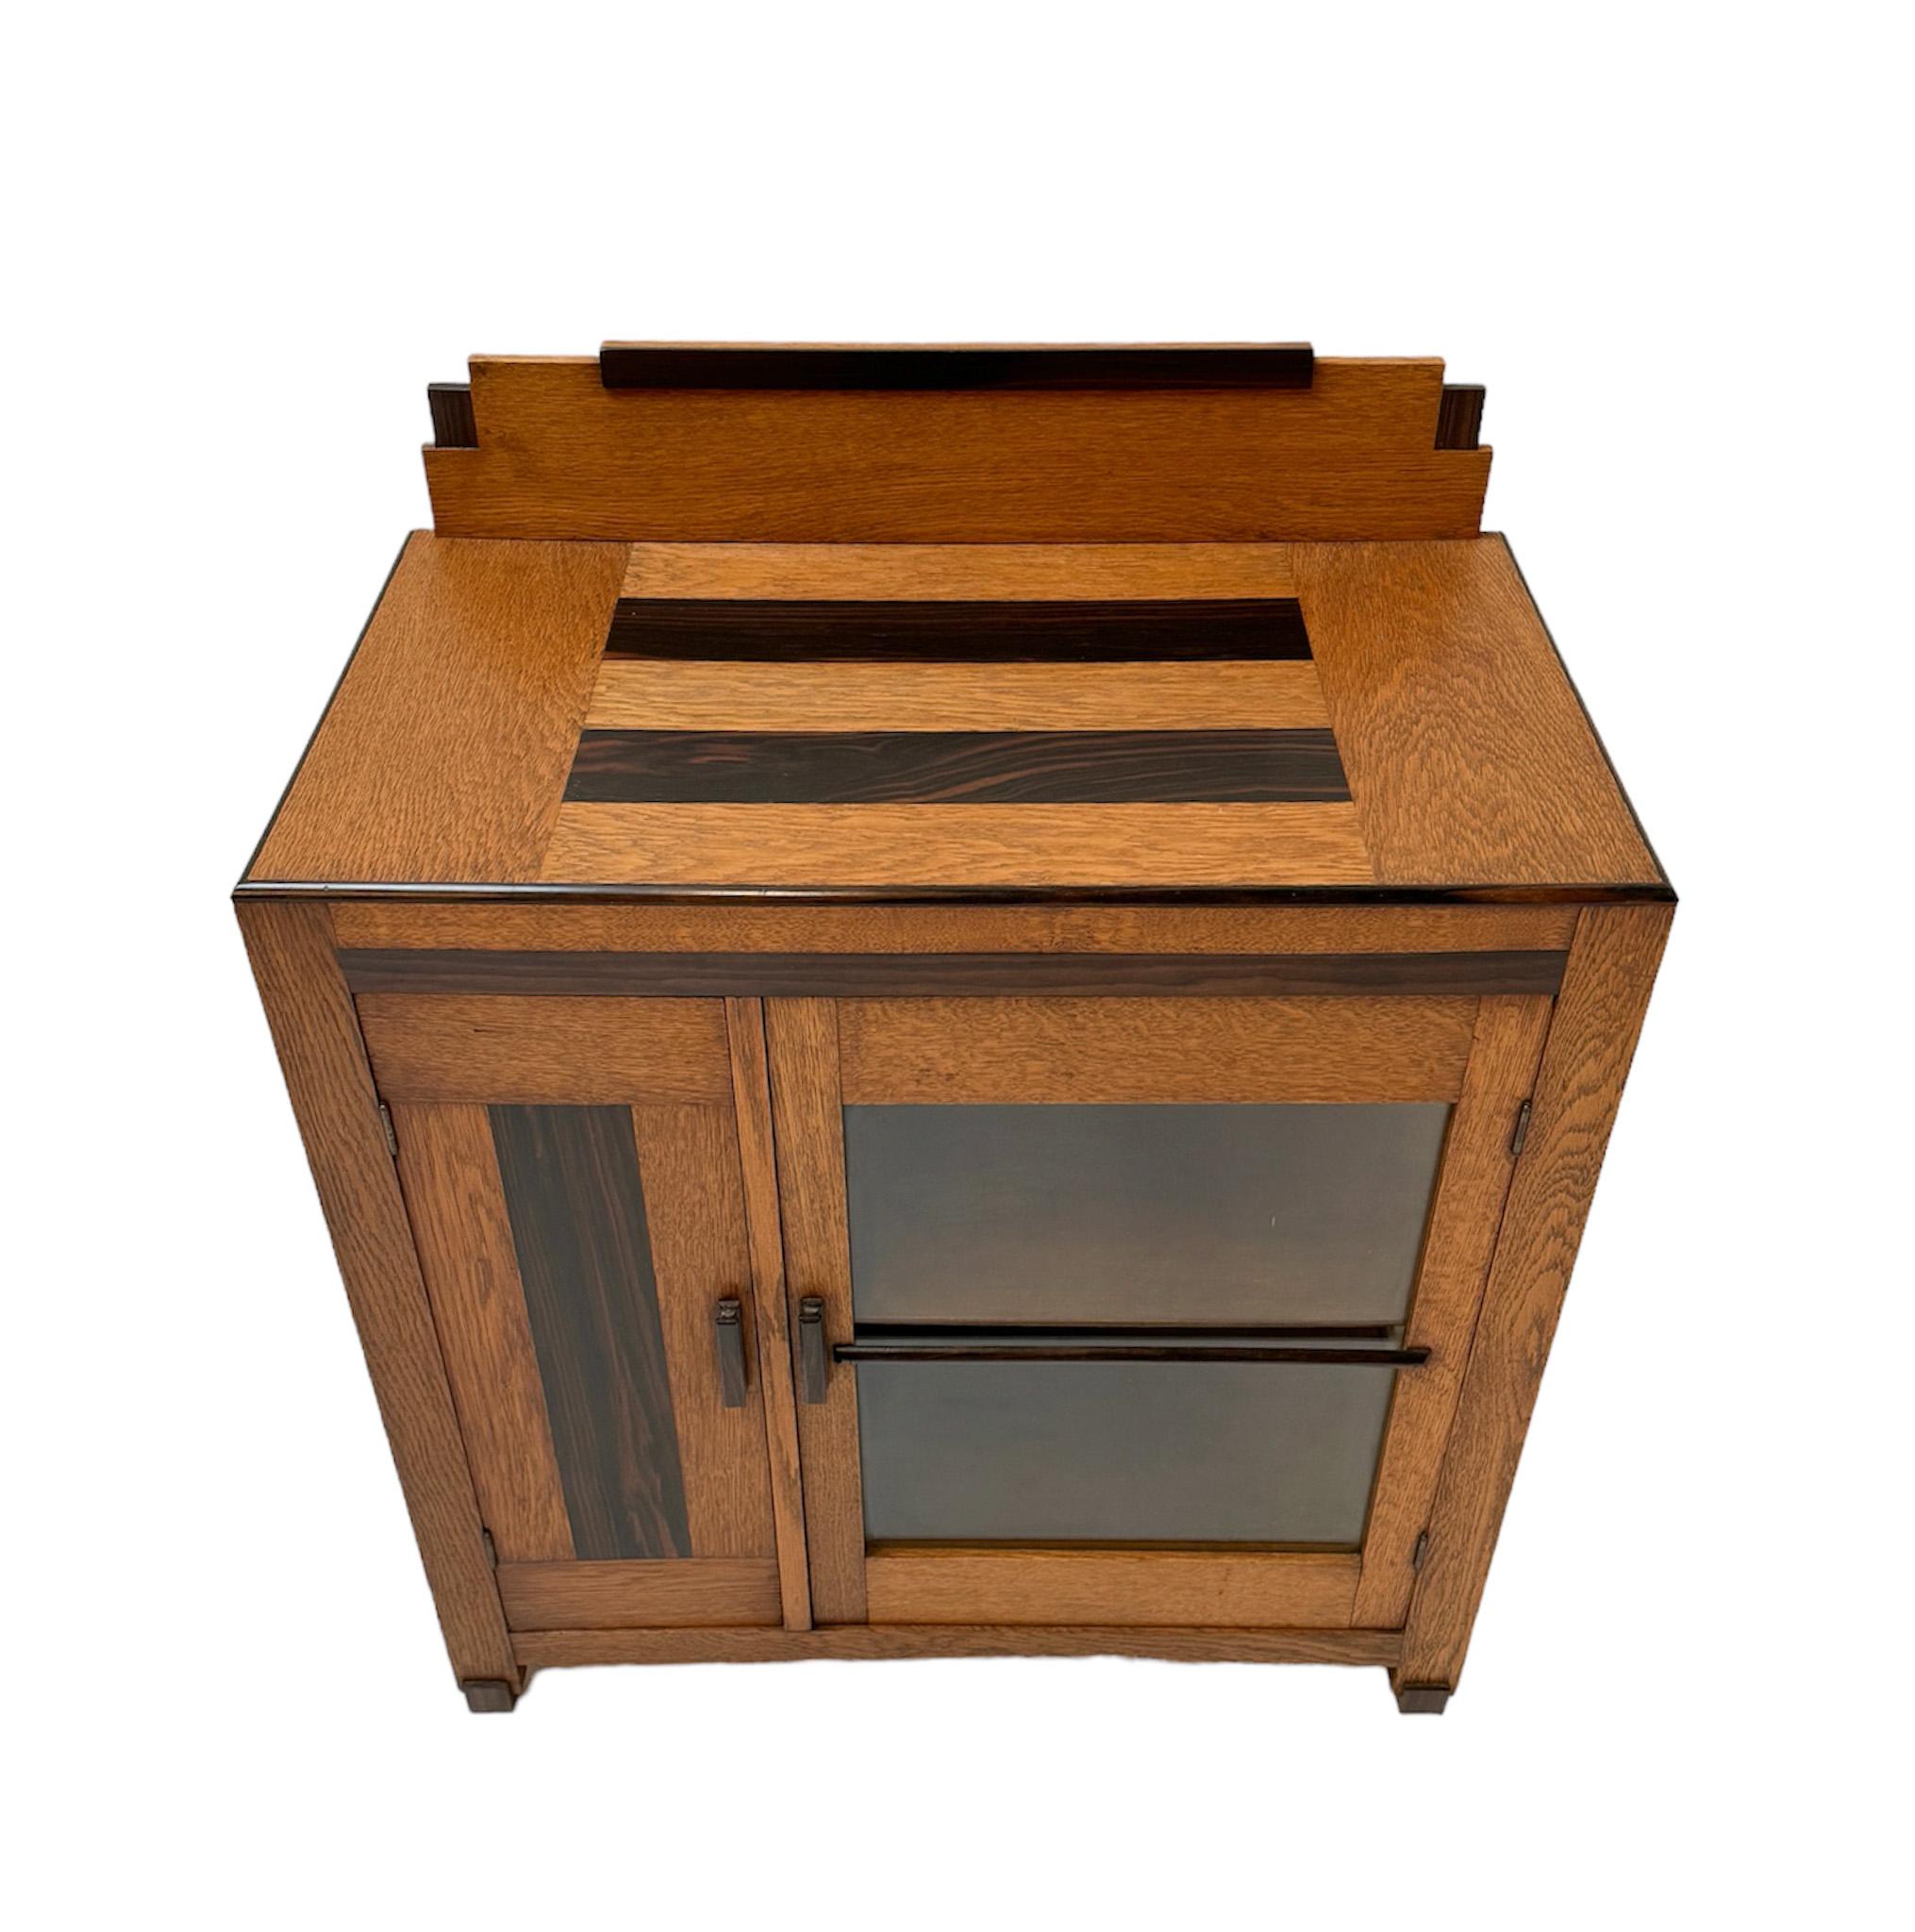 Stunning and rare Art Deco Modernist cabinet.
Striking Dutch design from the 1920s.
Solid oak and original oak veneered base with original macassar veneered lining.
Solid macassar handle on the door.
In very good original condition with minor wear